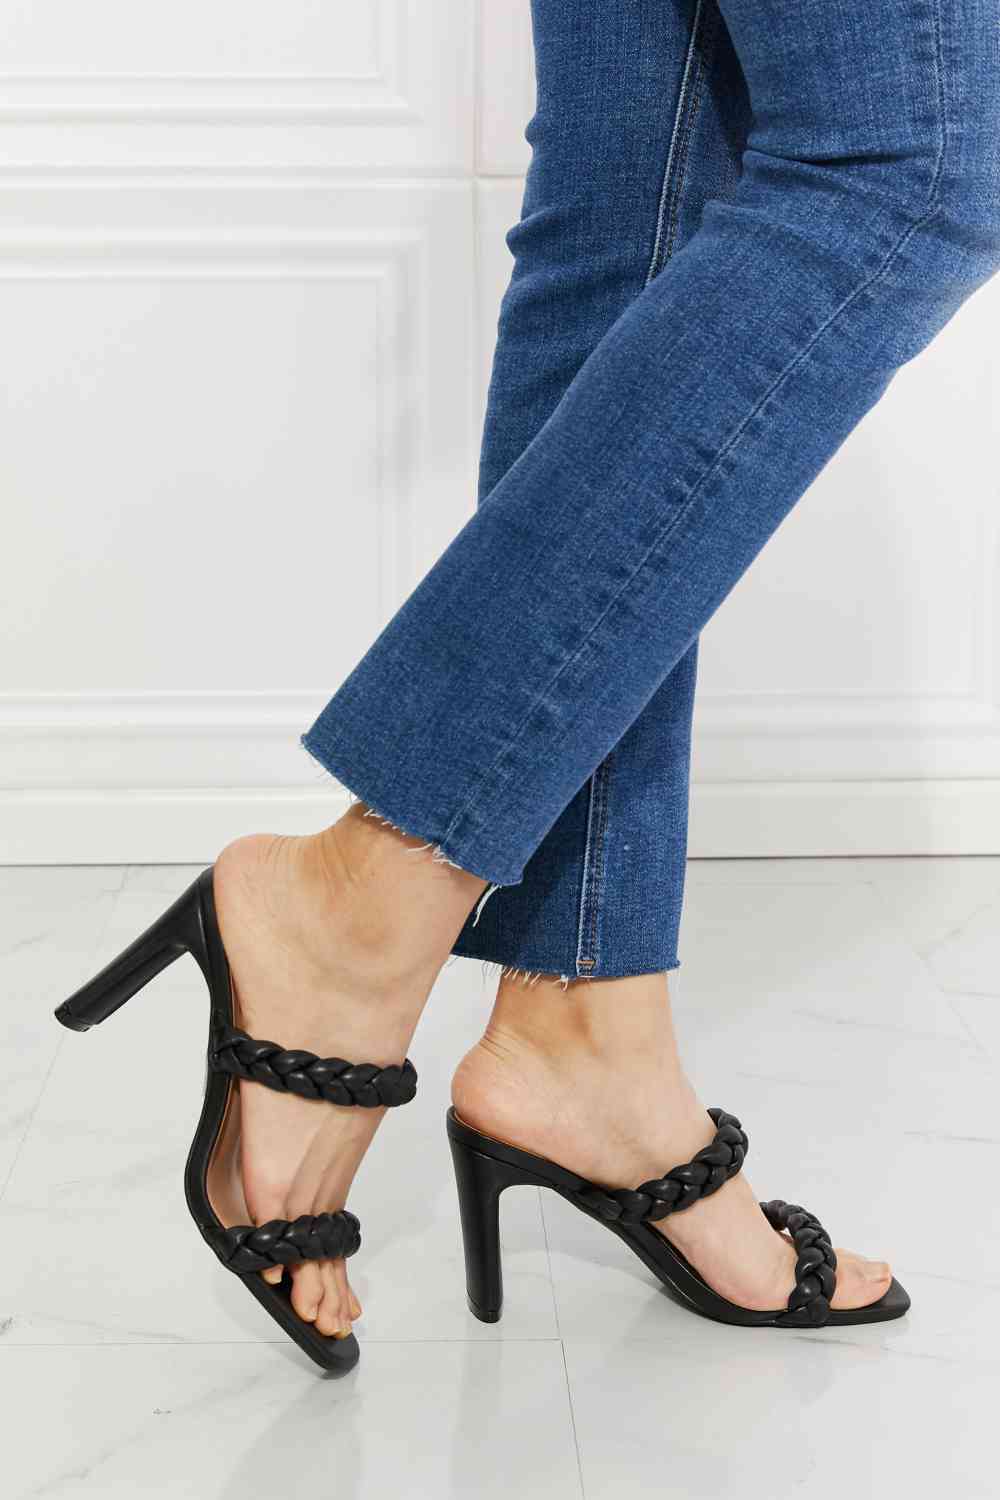 In Love Double Braided Block Heel Sandal in Black - Accessories - Shoes - 3 - 2024